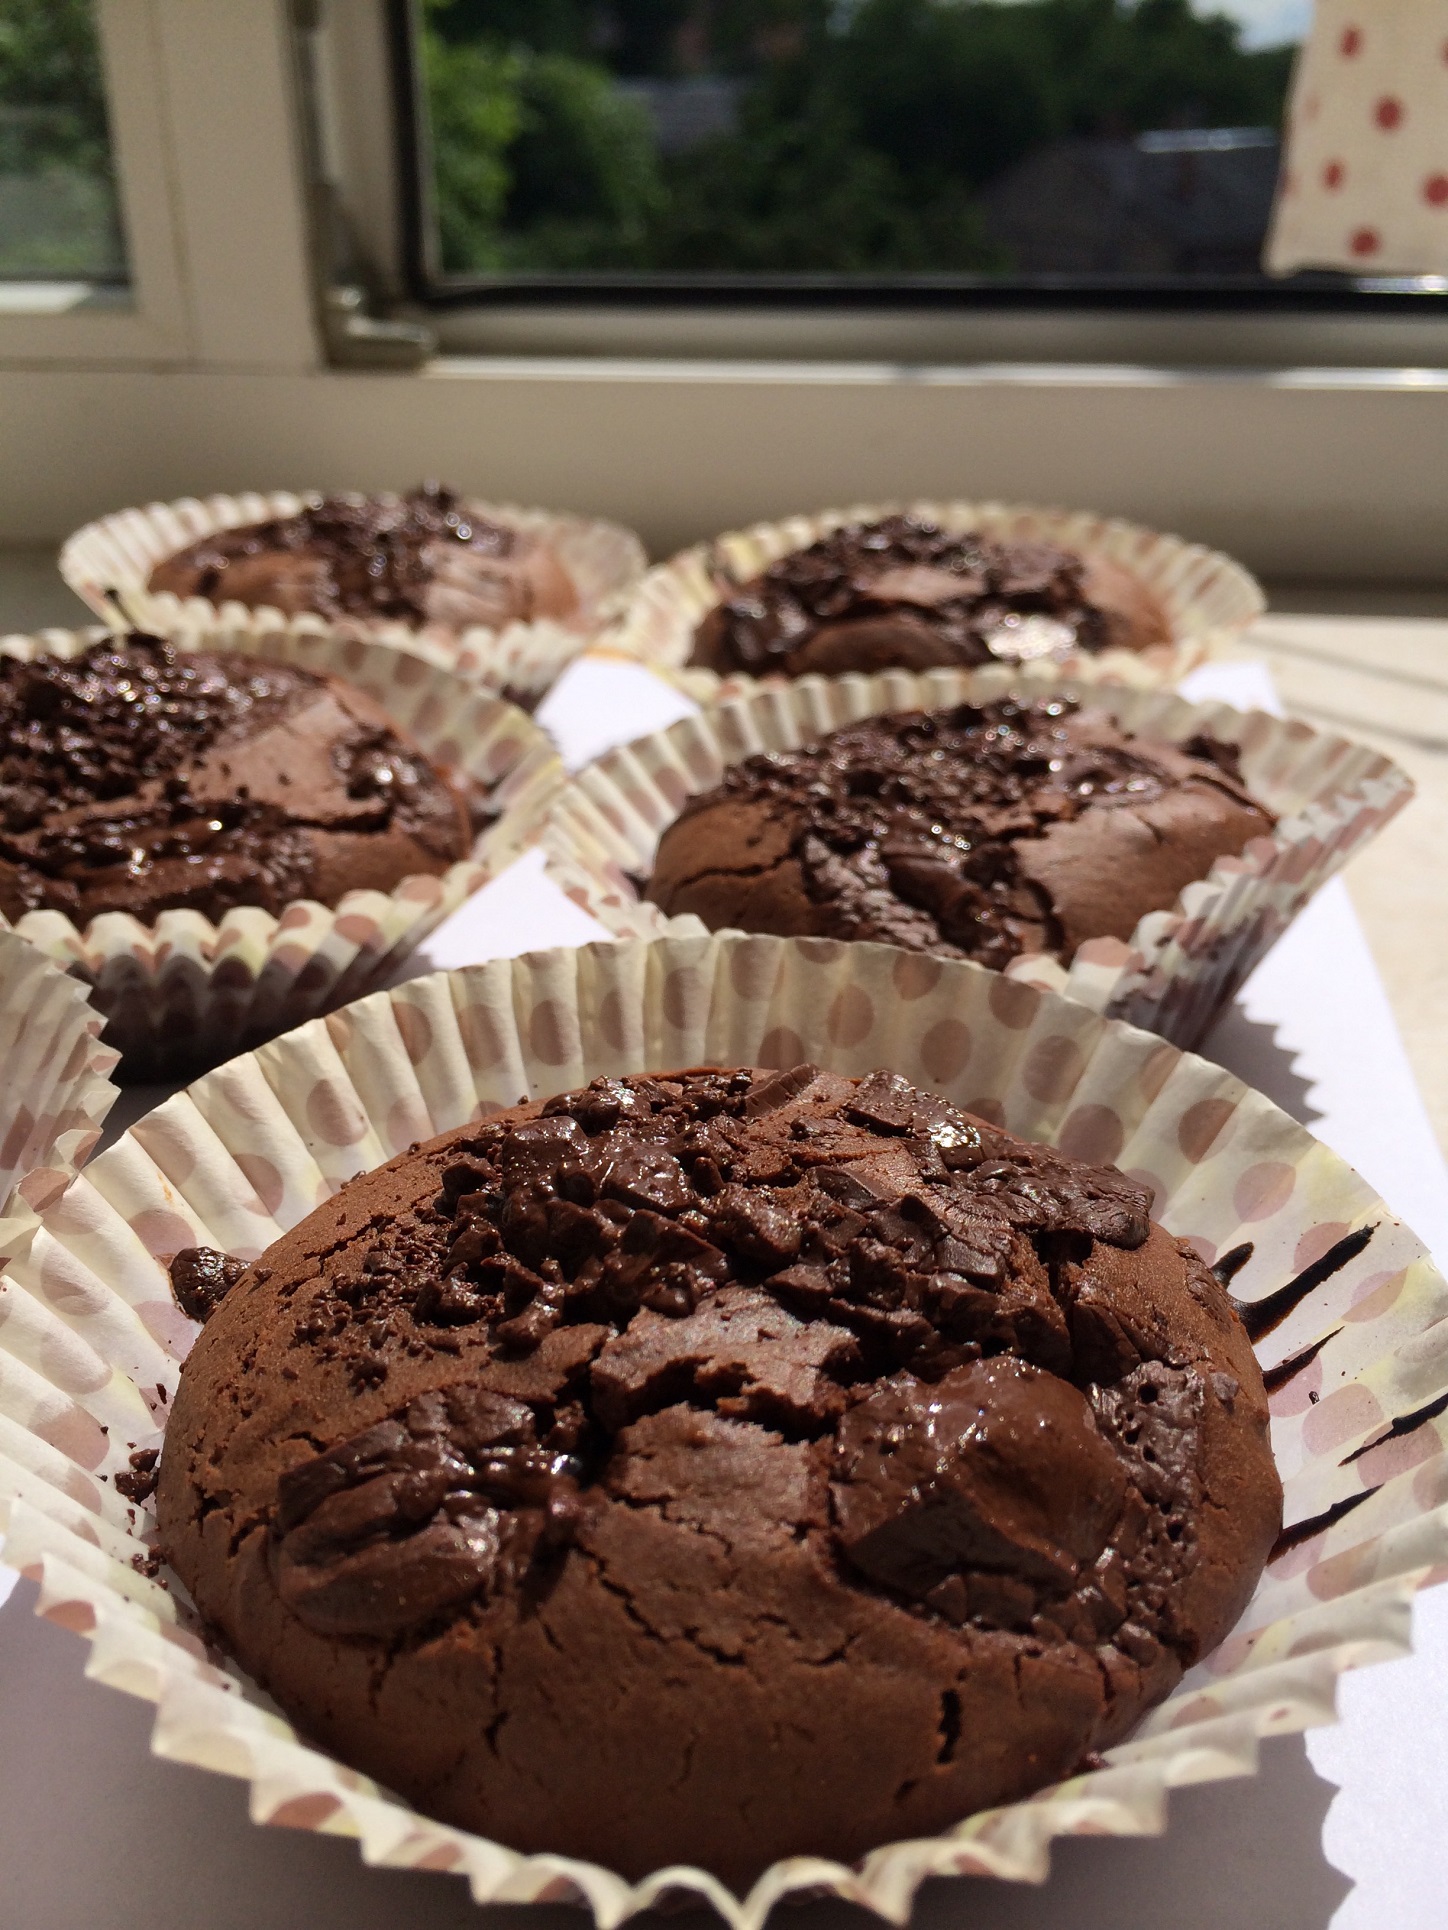 Chocolate Muffins with Chocolate Chips